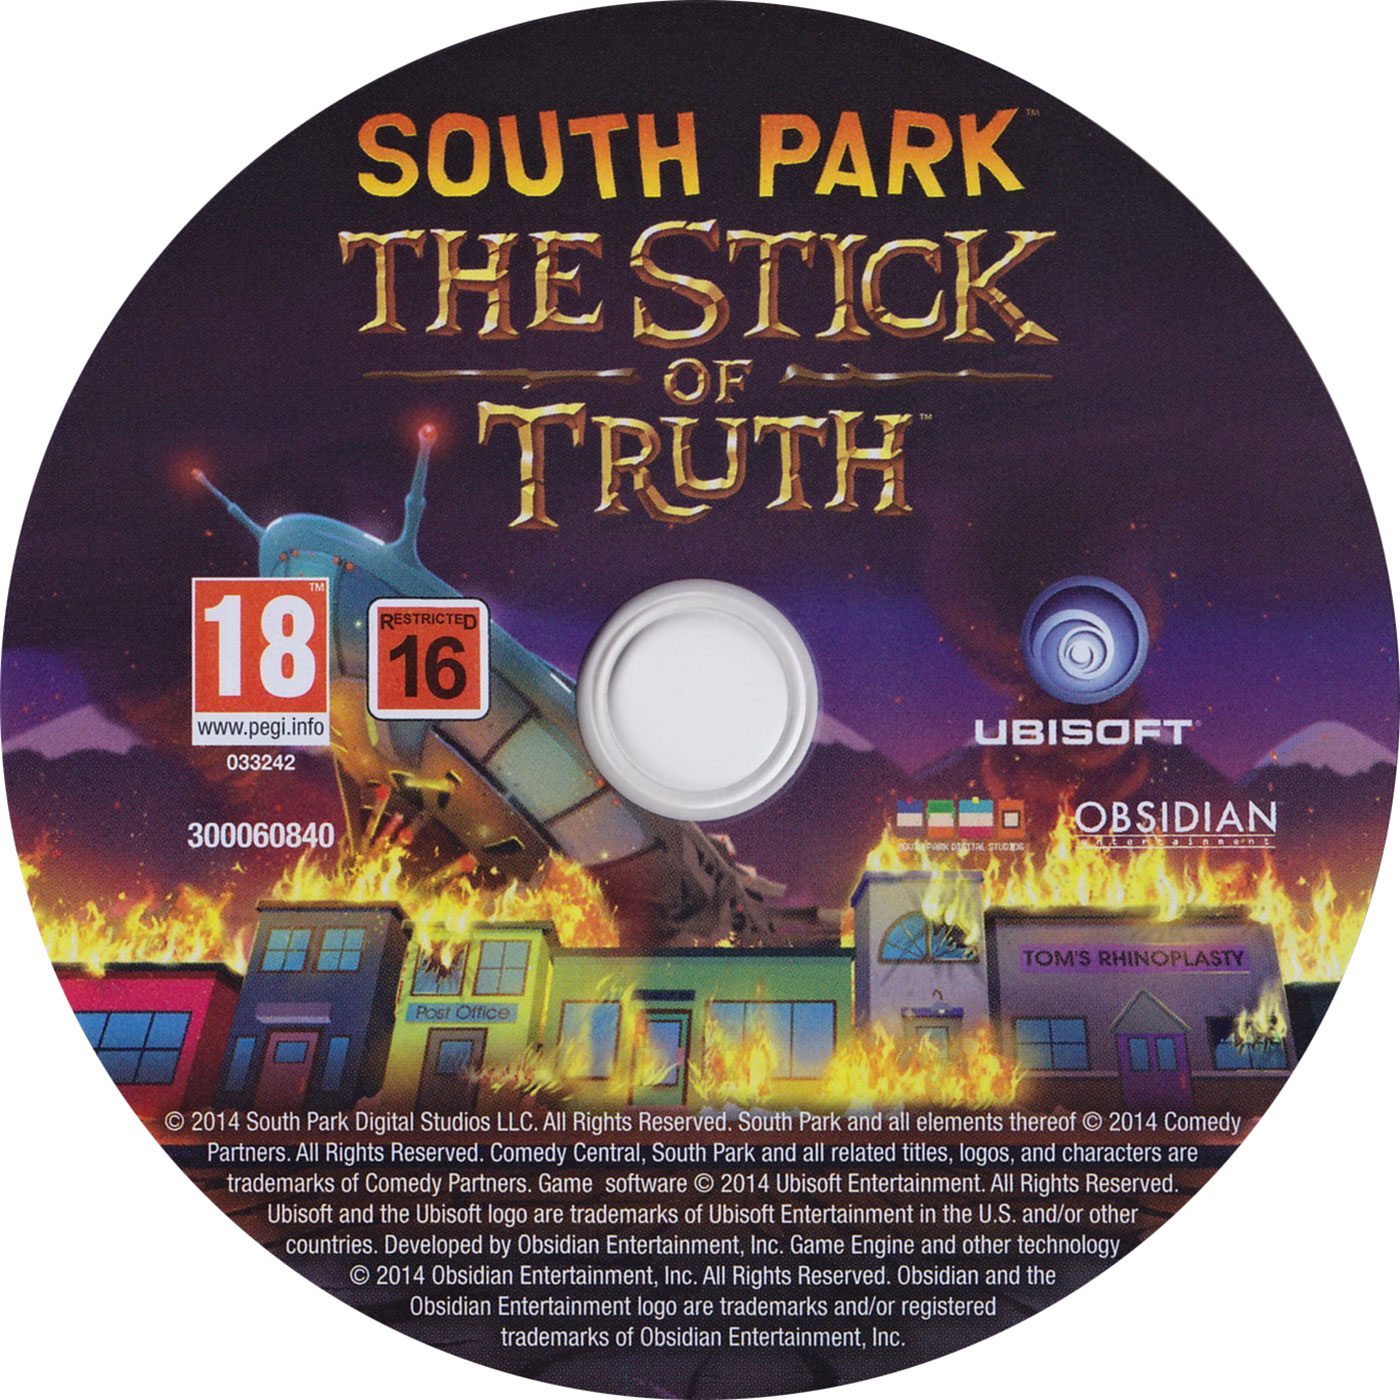 South Park: The Stick of Truth - CD obal